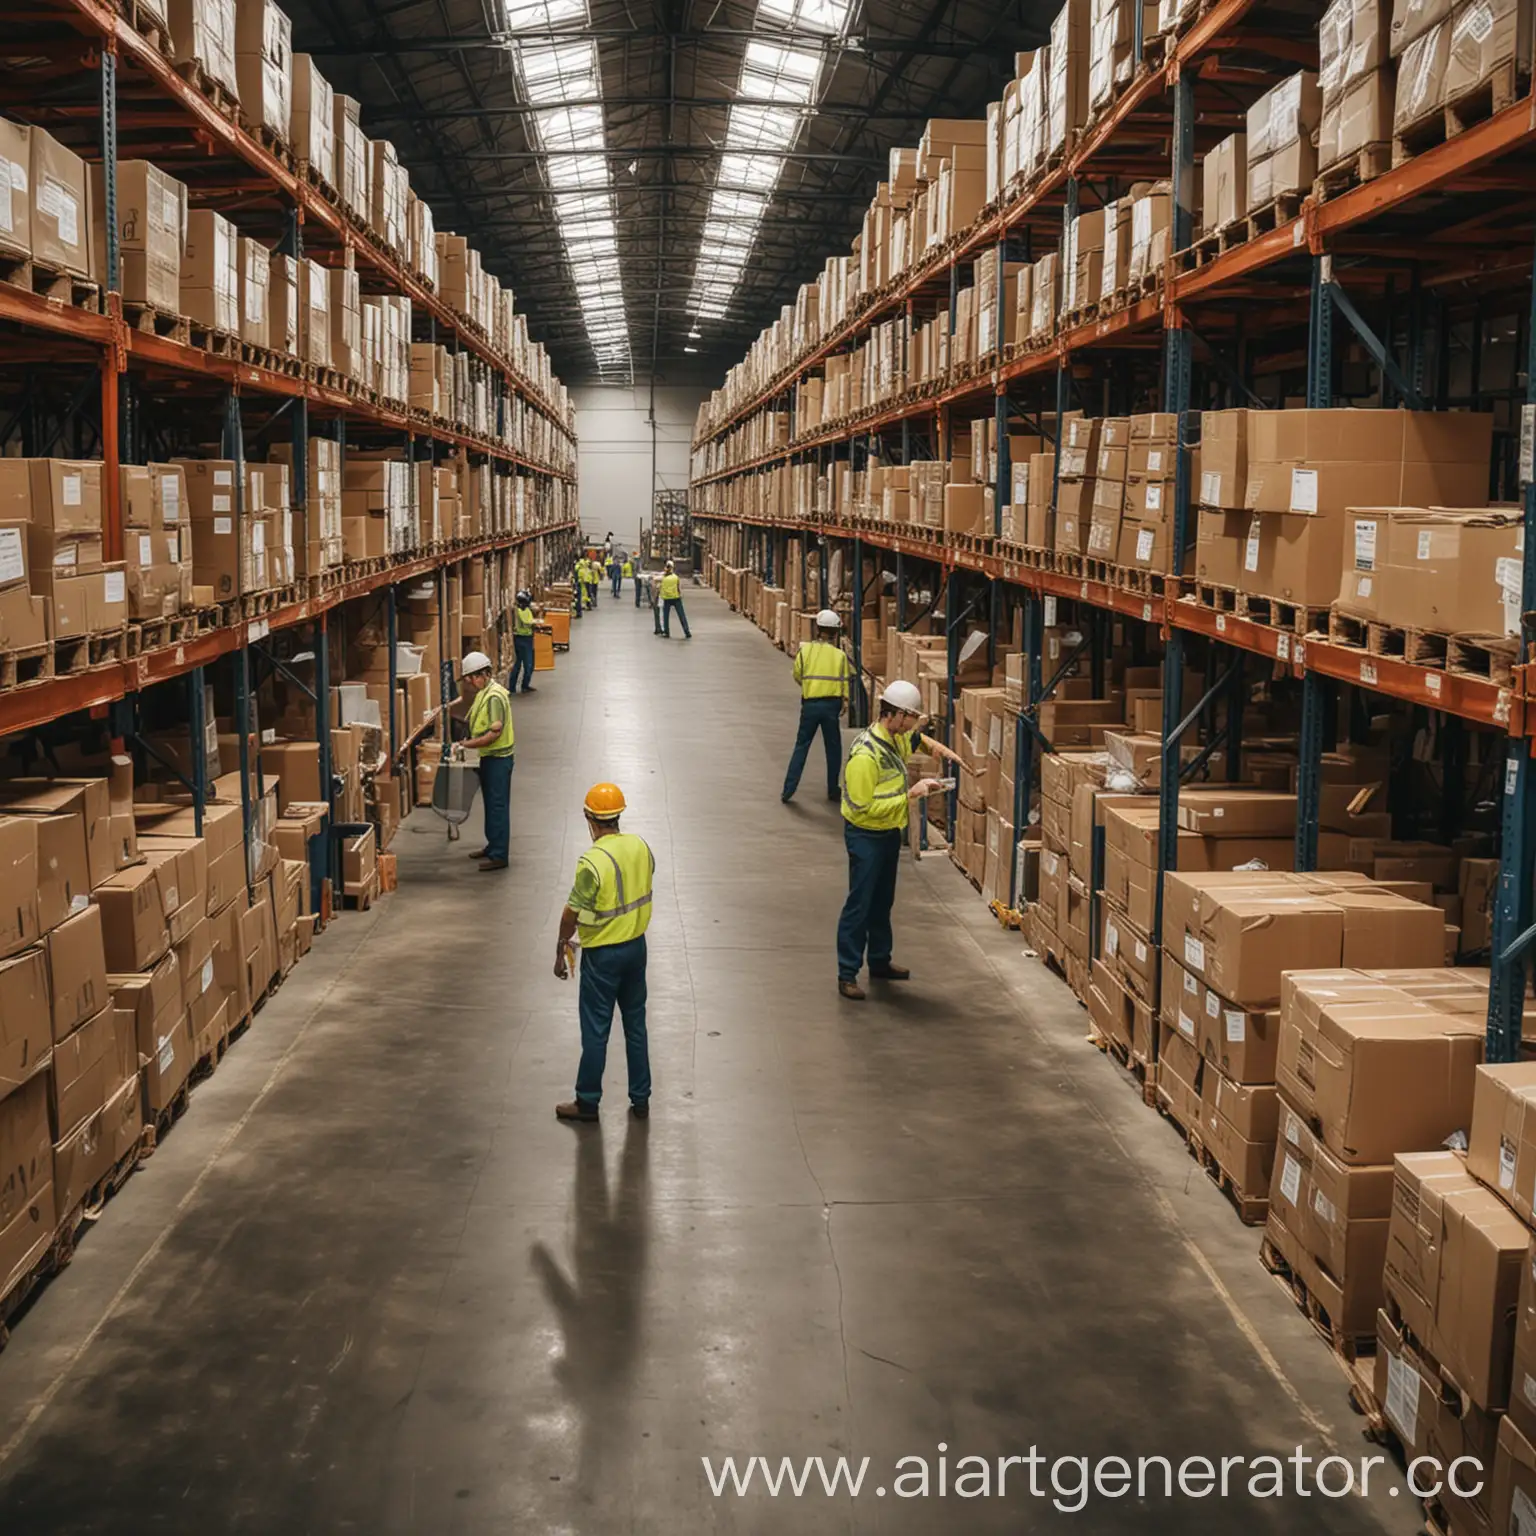 Warehouse-Employees-Working-Together-Efficient-Team-in-Action